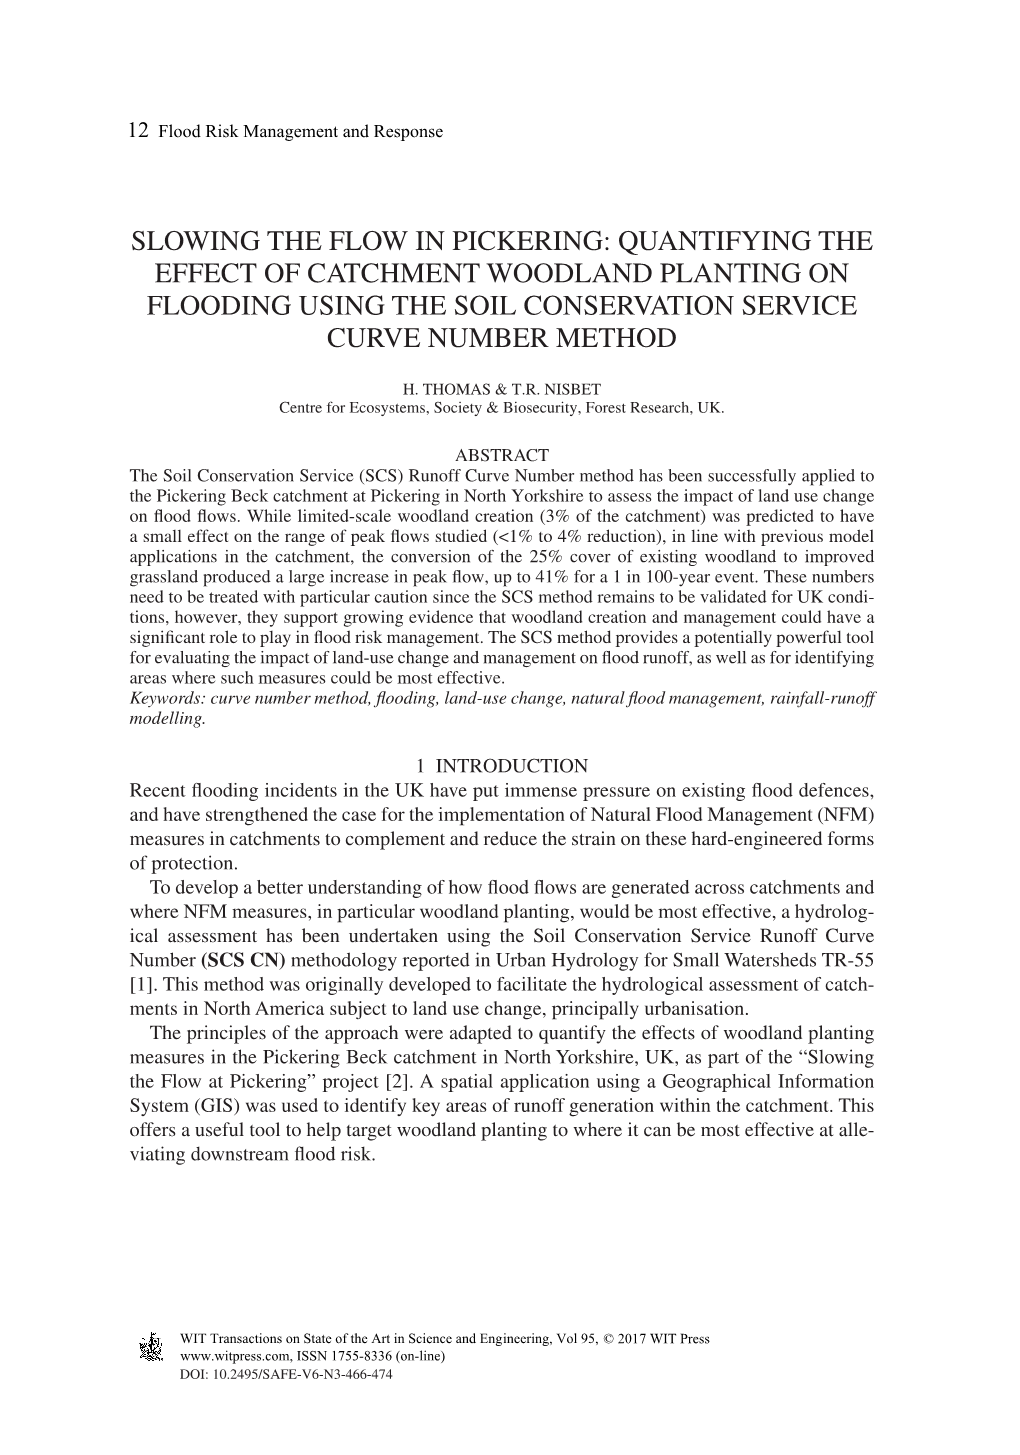 Slowing the Flow in Pickering: Quantifying the Effect of Catchment Woodland Planting on Flooding Using the Soil Conservation Service Curve Number Method